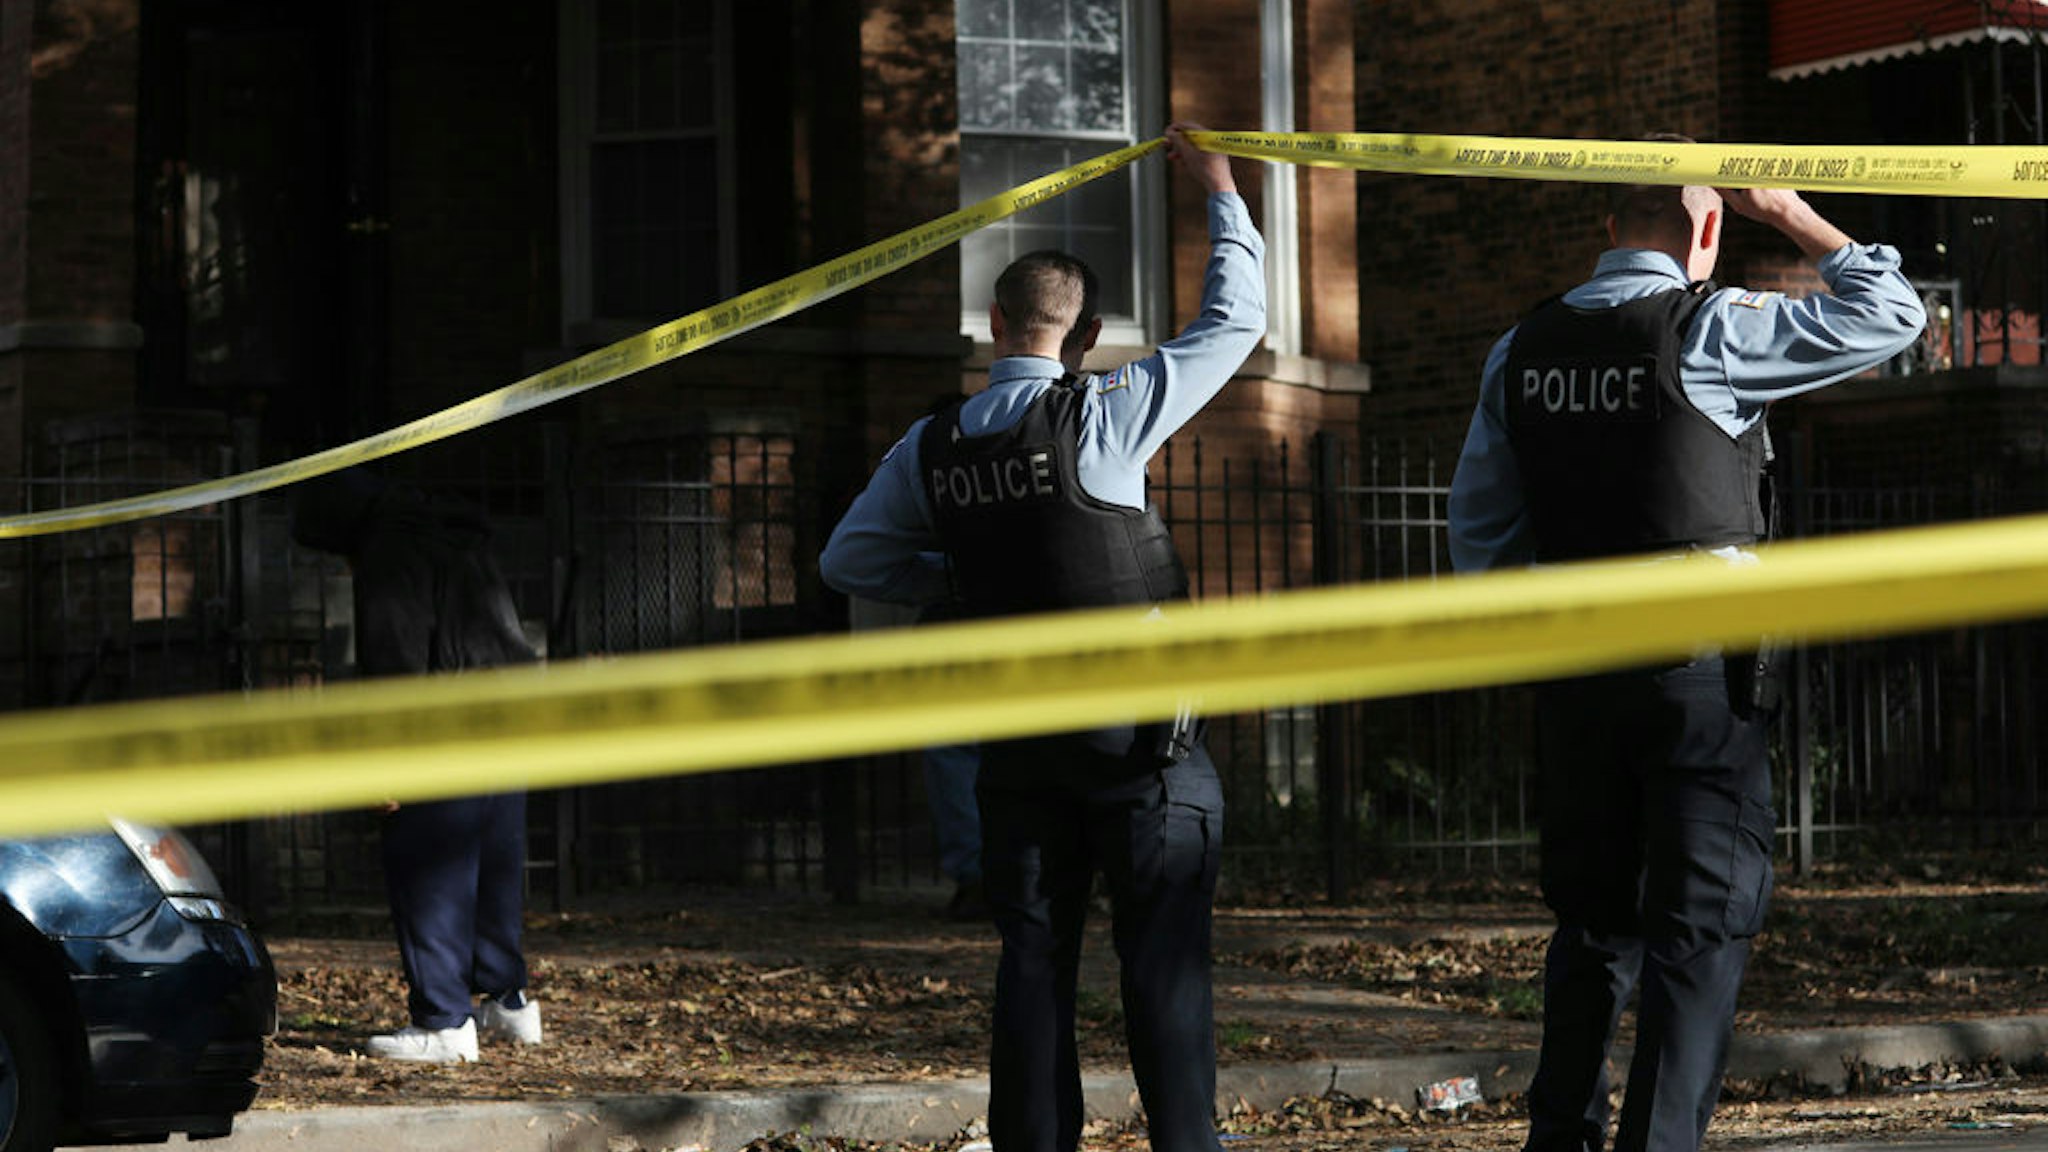 Police officers lift perimeter tape at the scene of a multiple shooting in the 700 block of North Trumbull Avenue in the Humboldt Park neighborhood of Chicago on Oct. 27, 2021, in Chicago. (John J. Kim/Chicago Tribune/Tribune News Service via Getty Images)